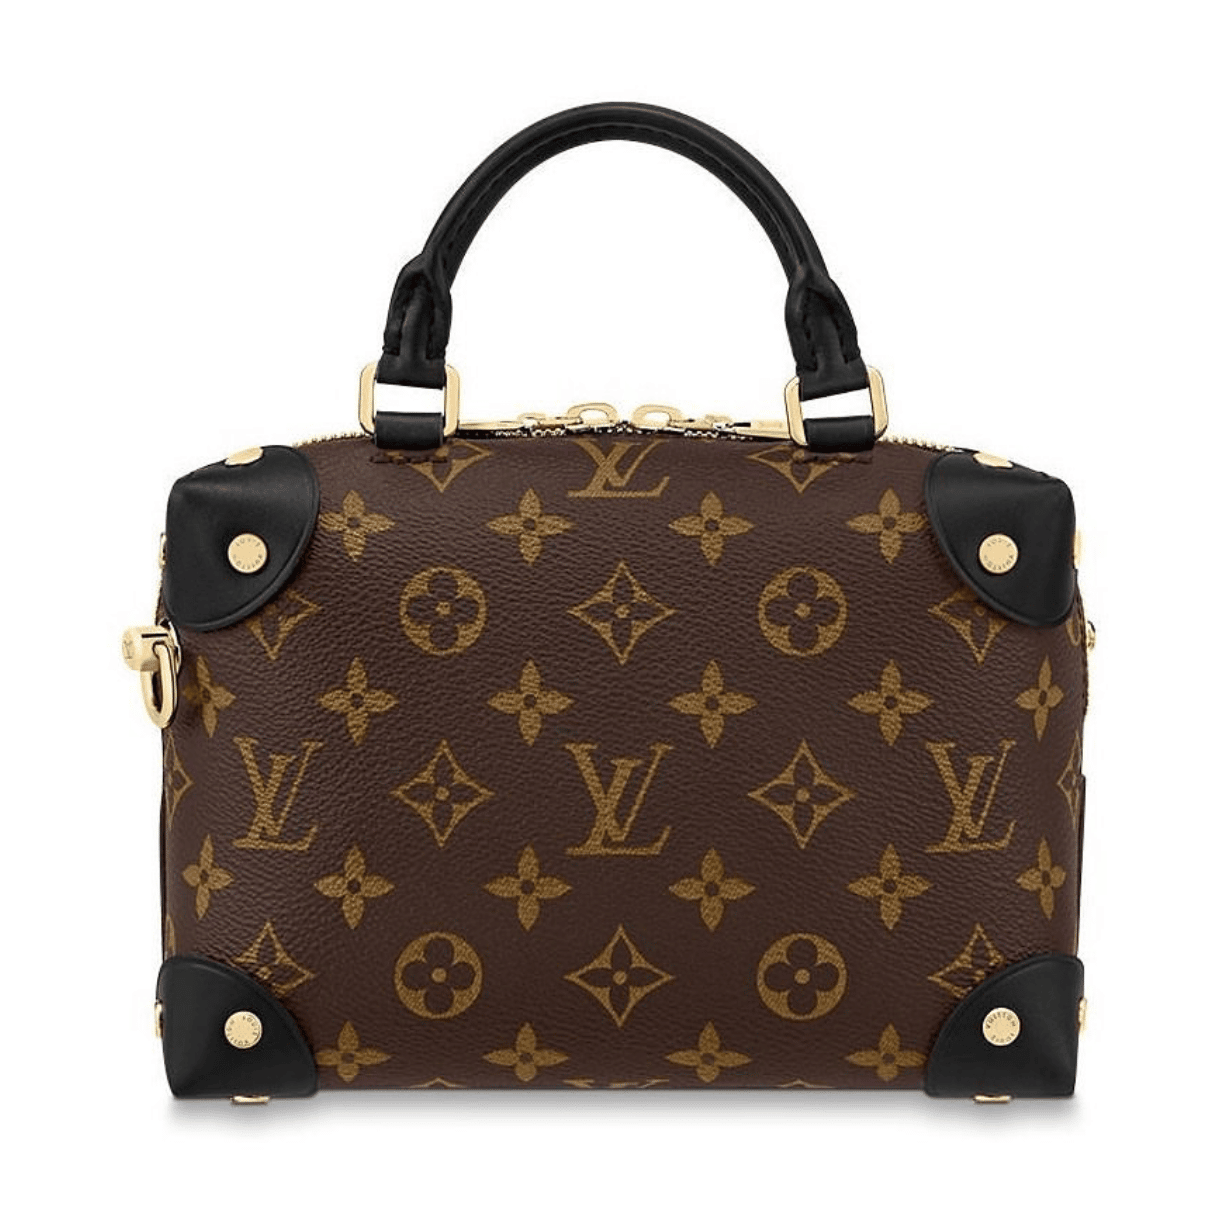 Unlocking new levels of style with the LV Petite Malle Capitale